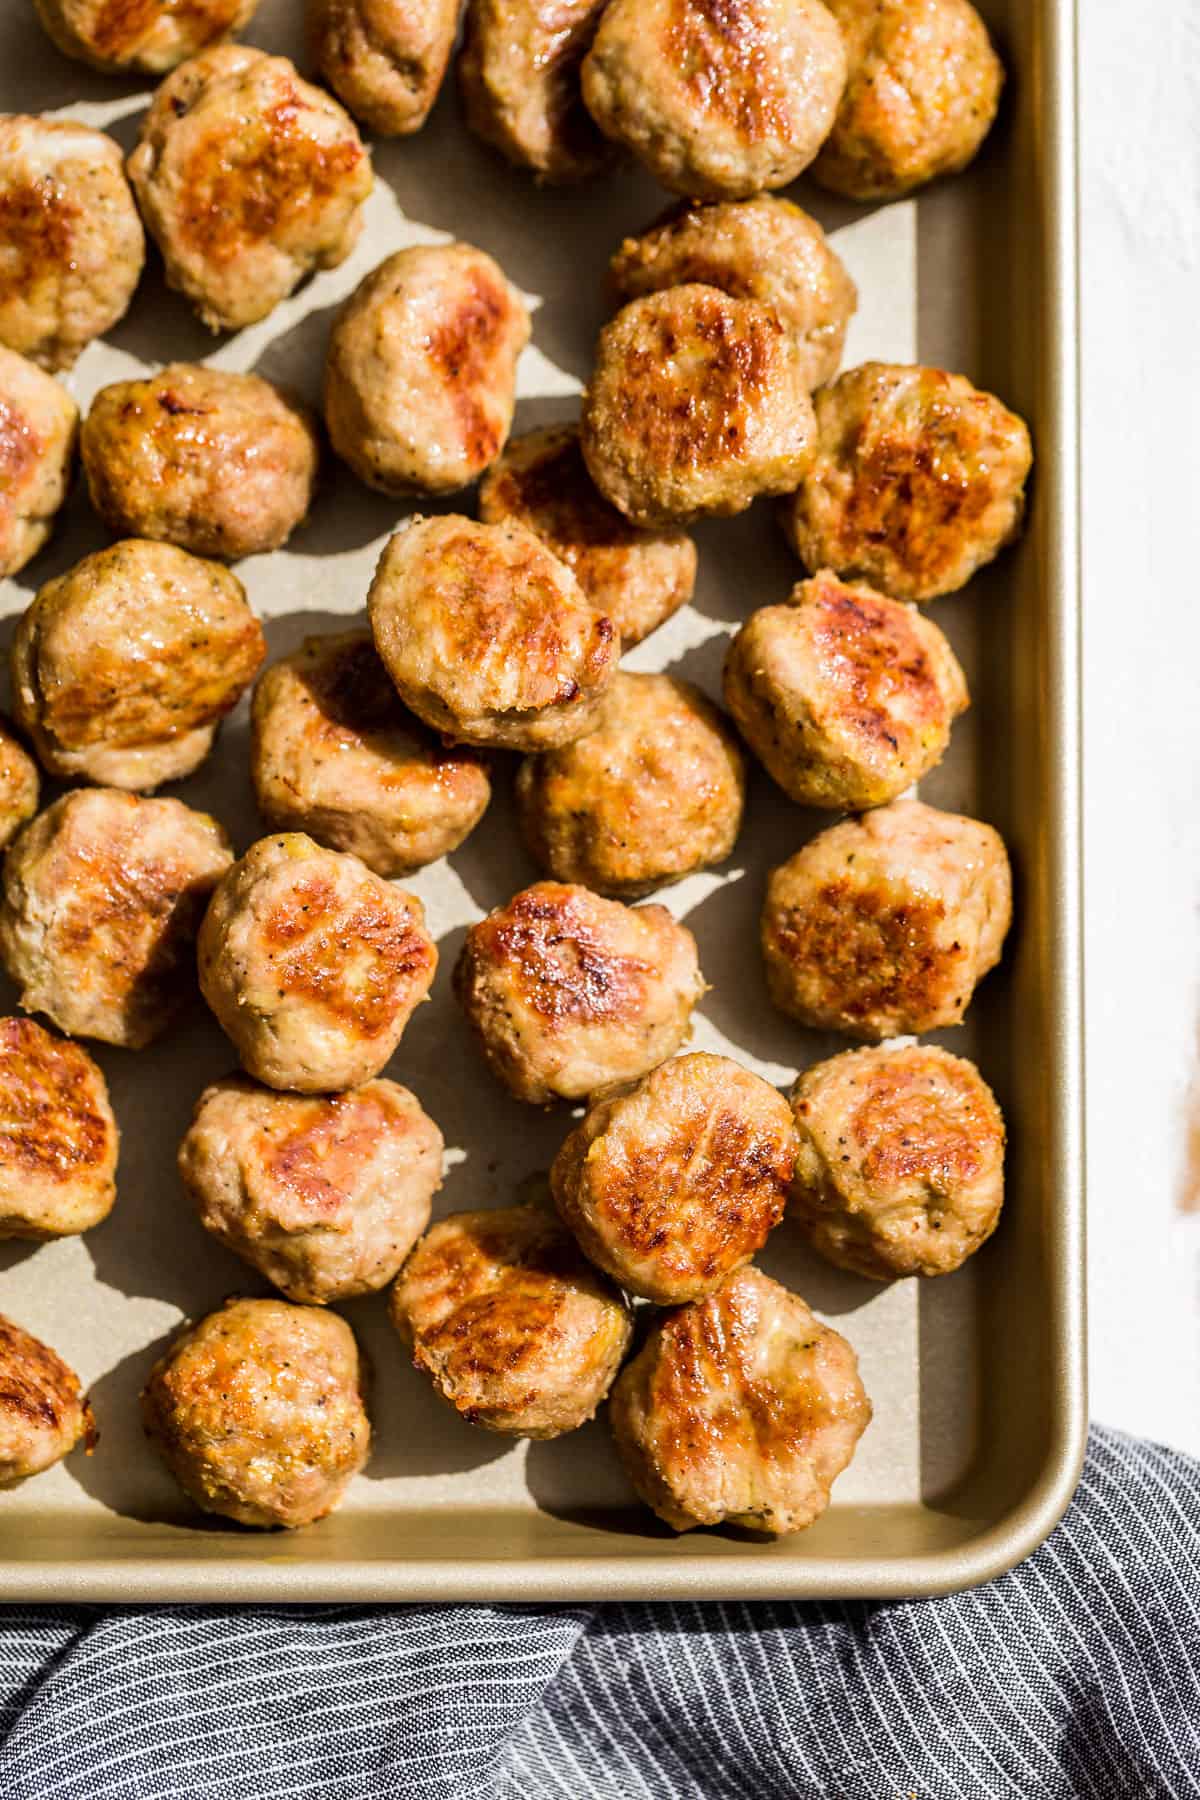 Straight down view of Baked Turkey Meatballs on a gold baking sheet with a blue linen on the side.